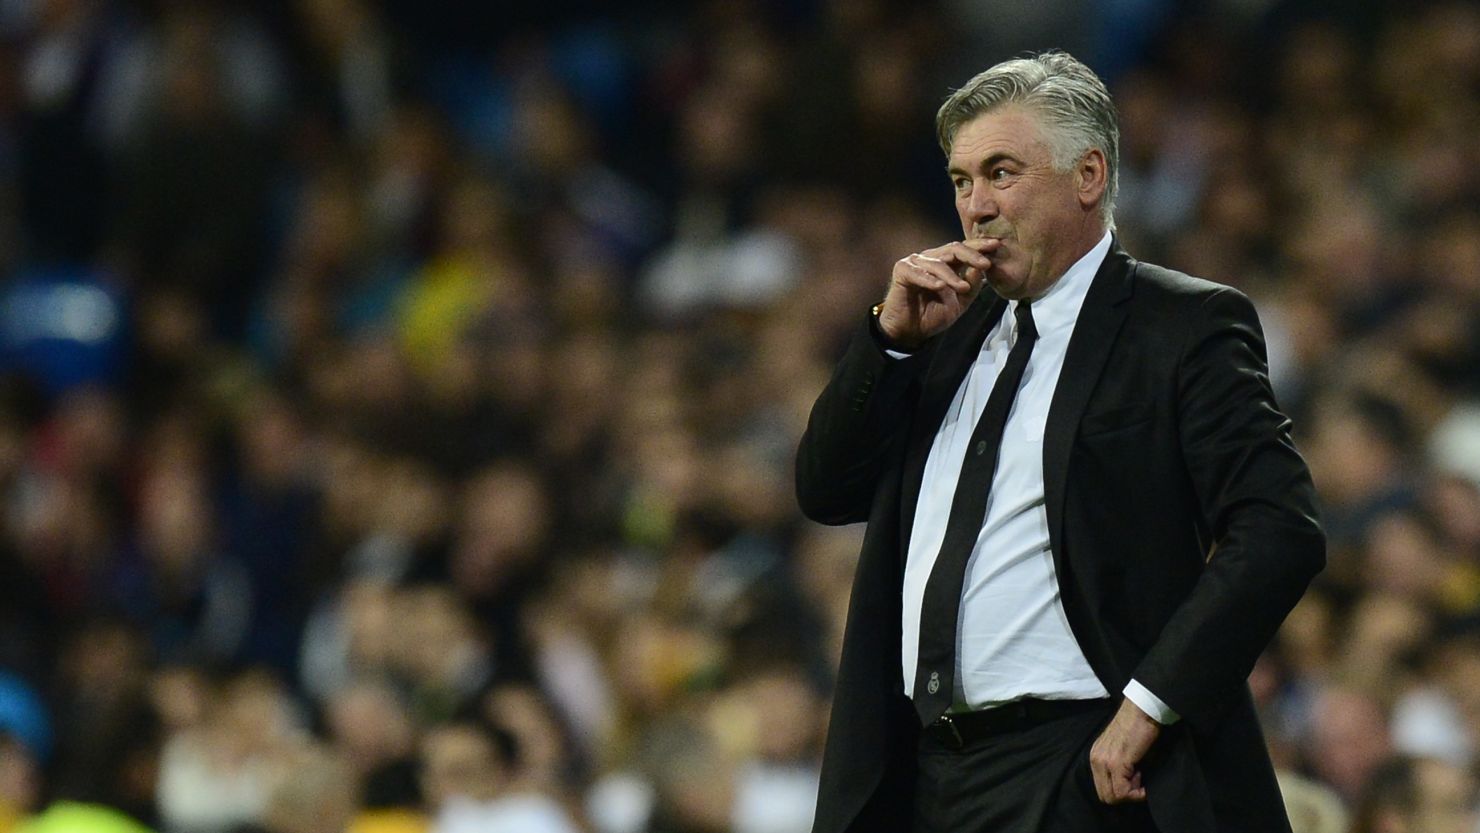 Italian coach Carlo Ancelotti is in his first season at Real Madrid, having replaced Jose Mourinho.